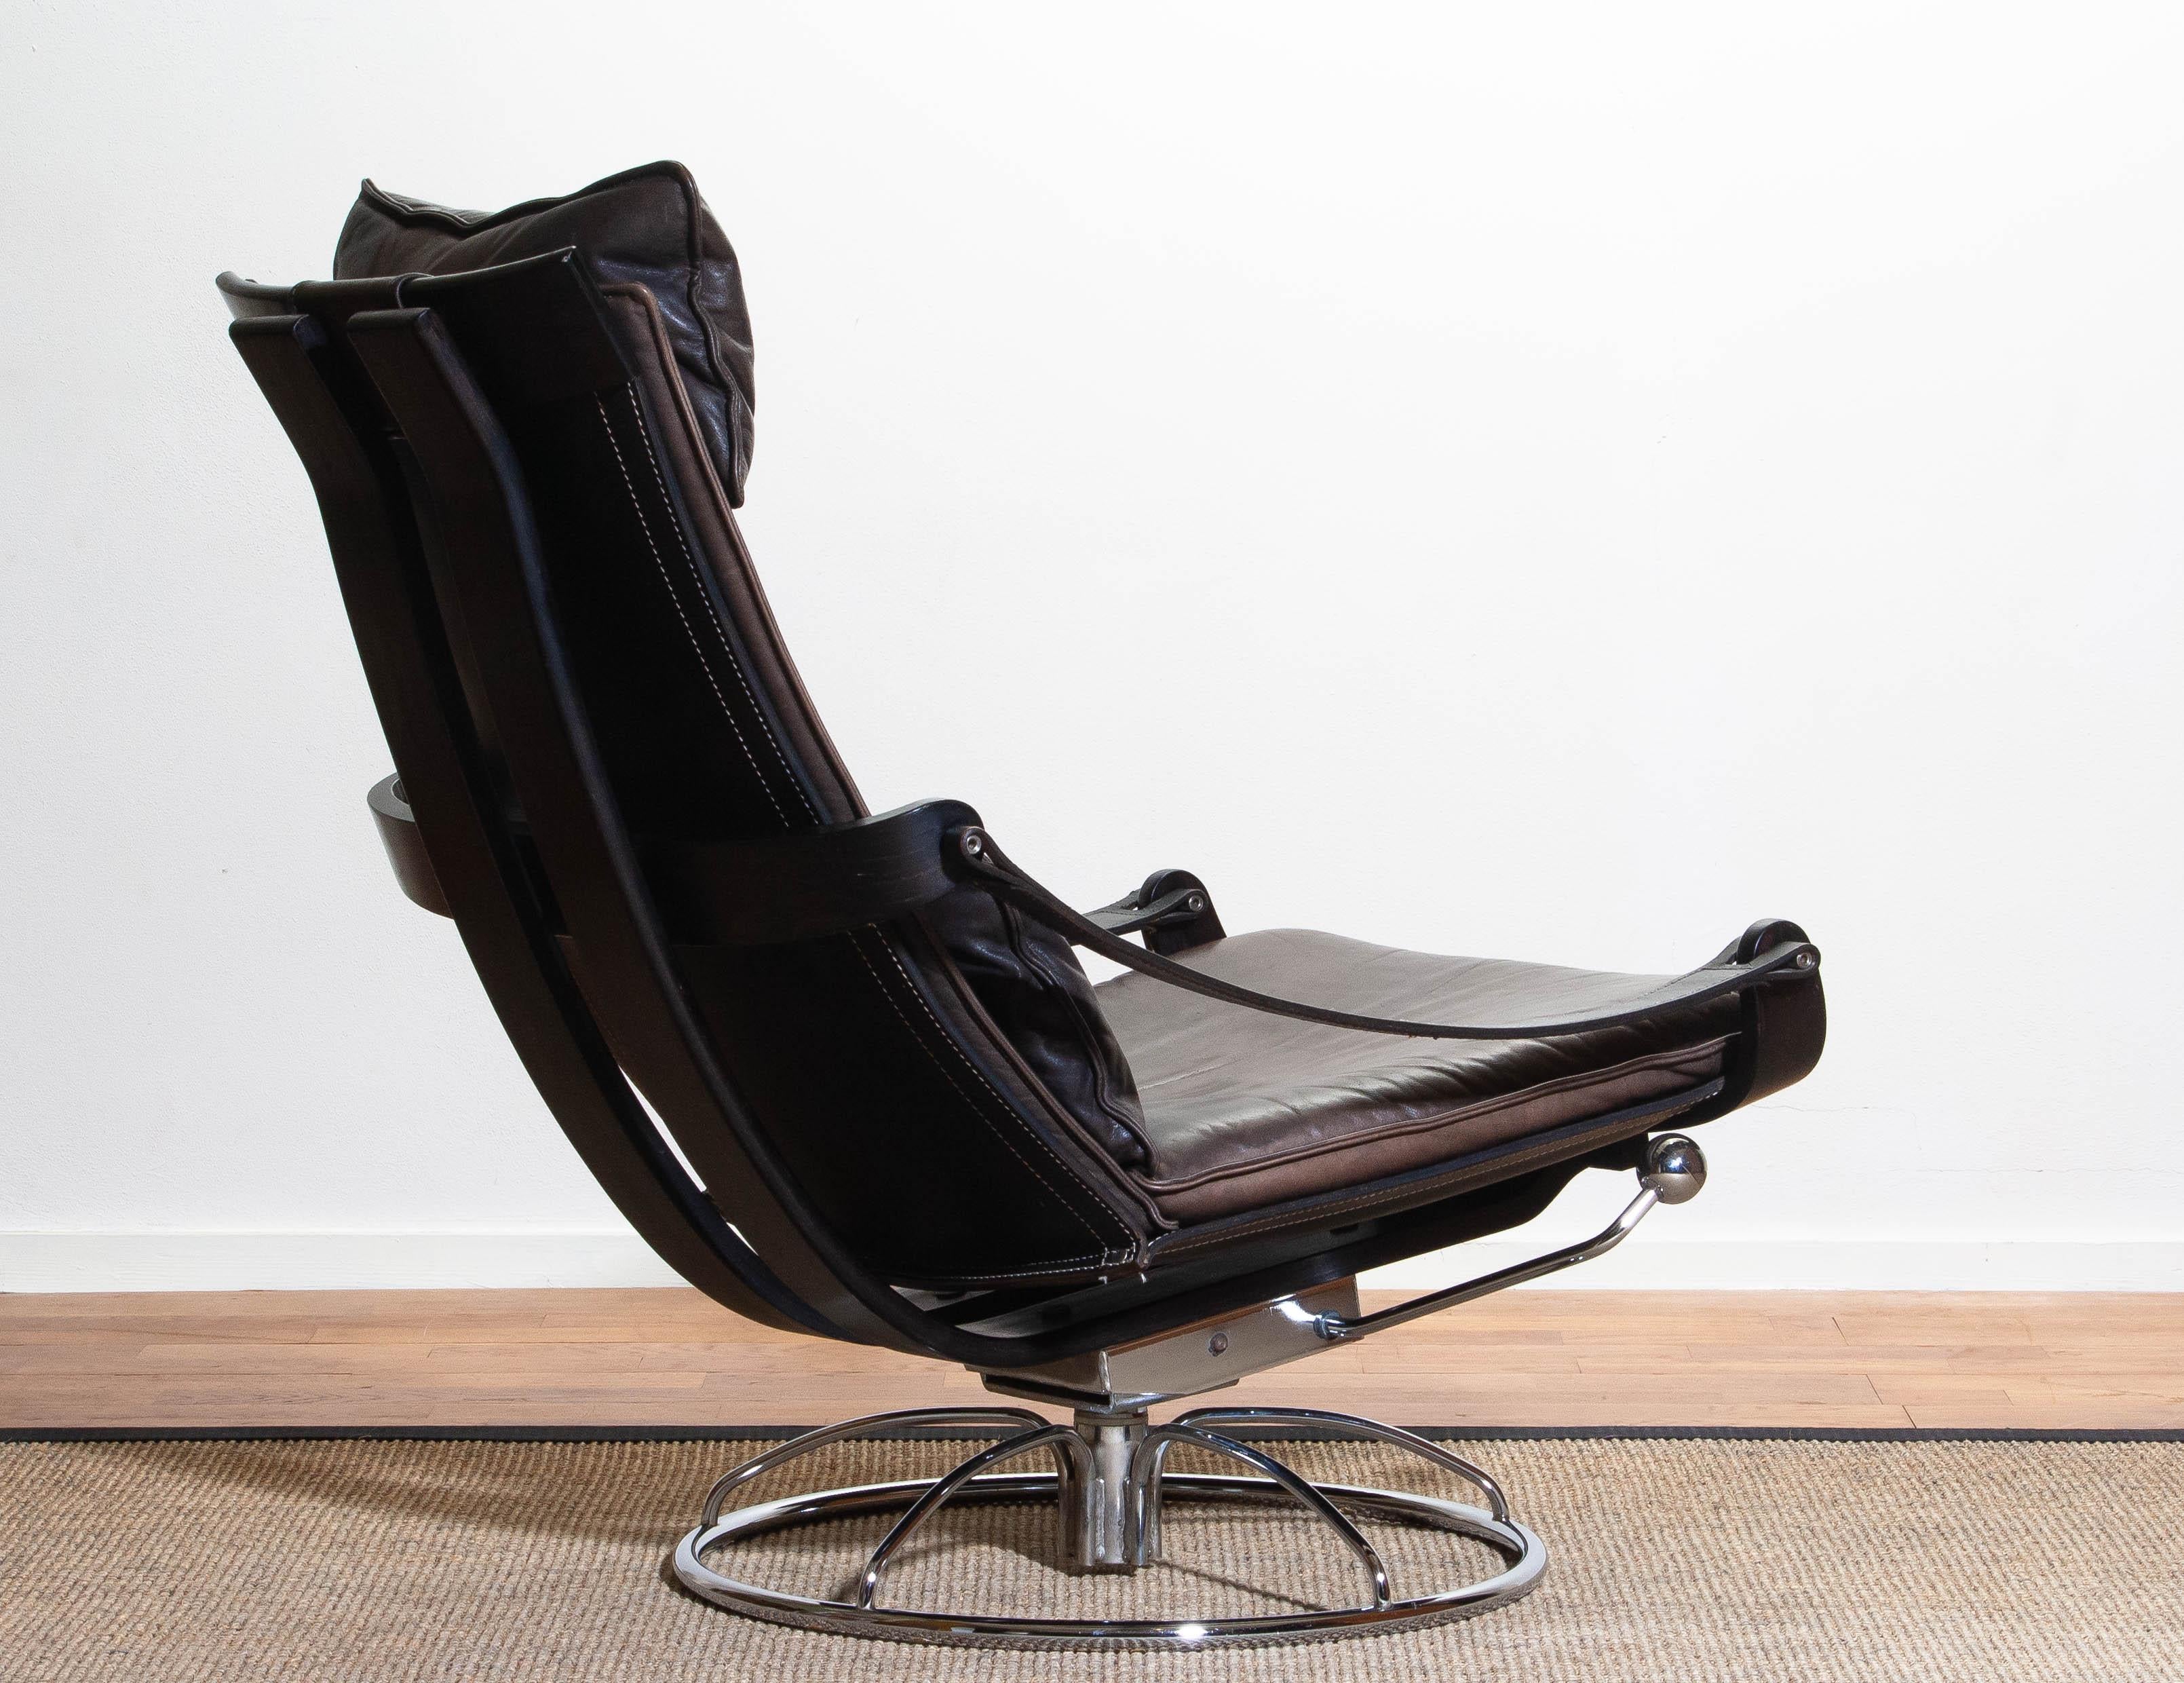 Late 20th Century 1970s Artistic Leather Swivel / Relax Chair by Ake Fribytter for Nelo Sweden